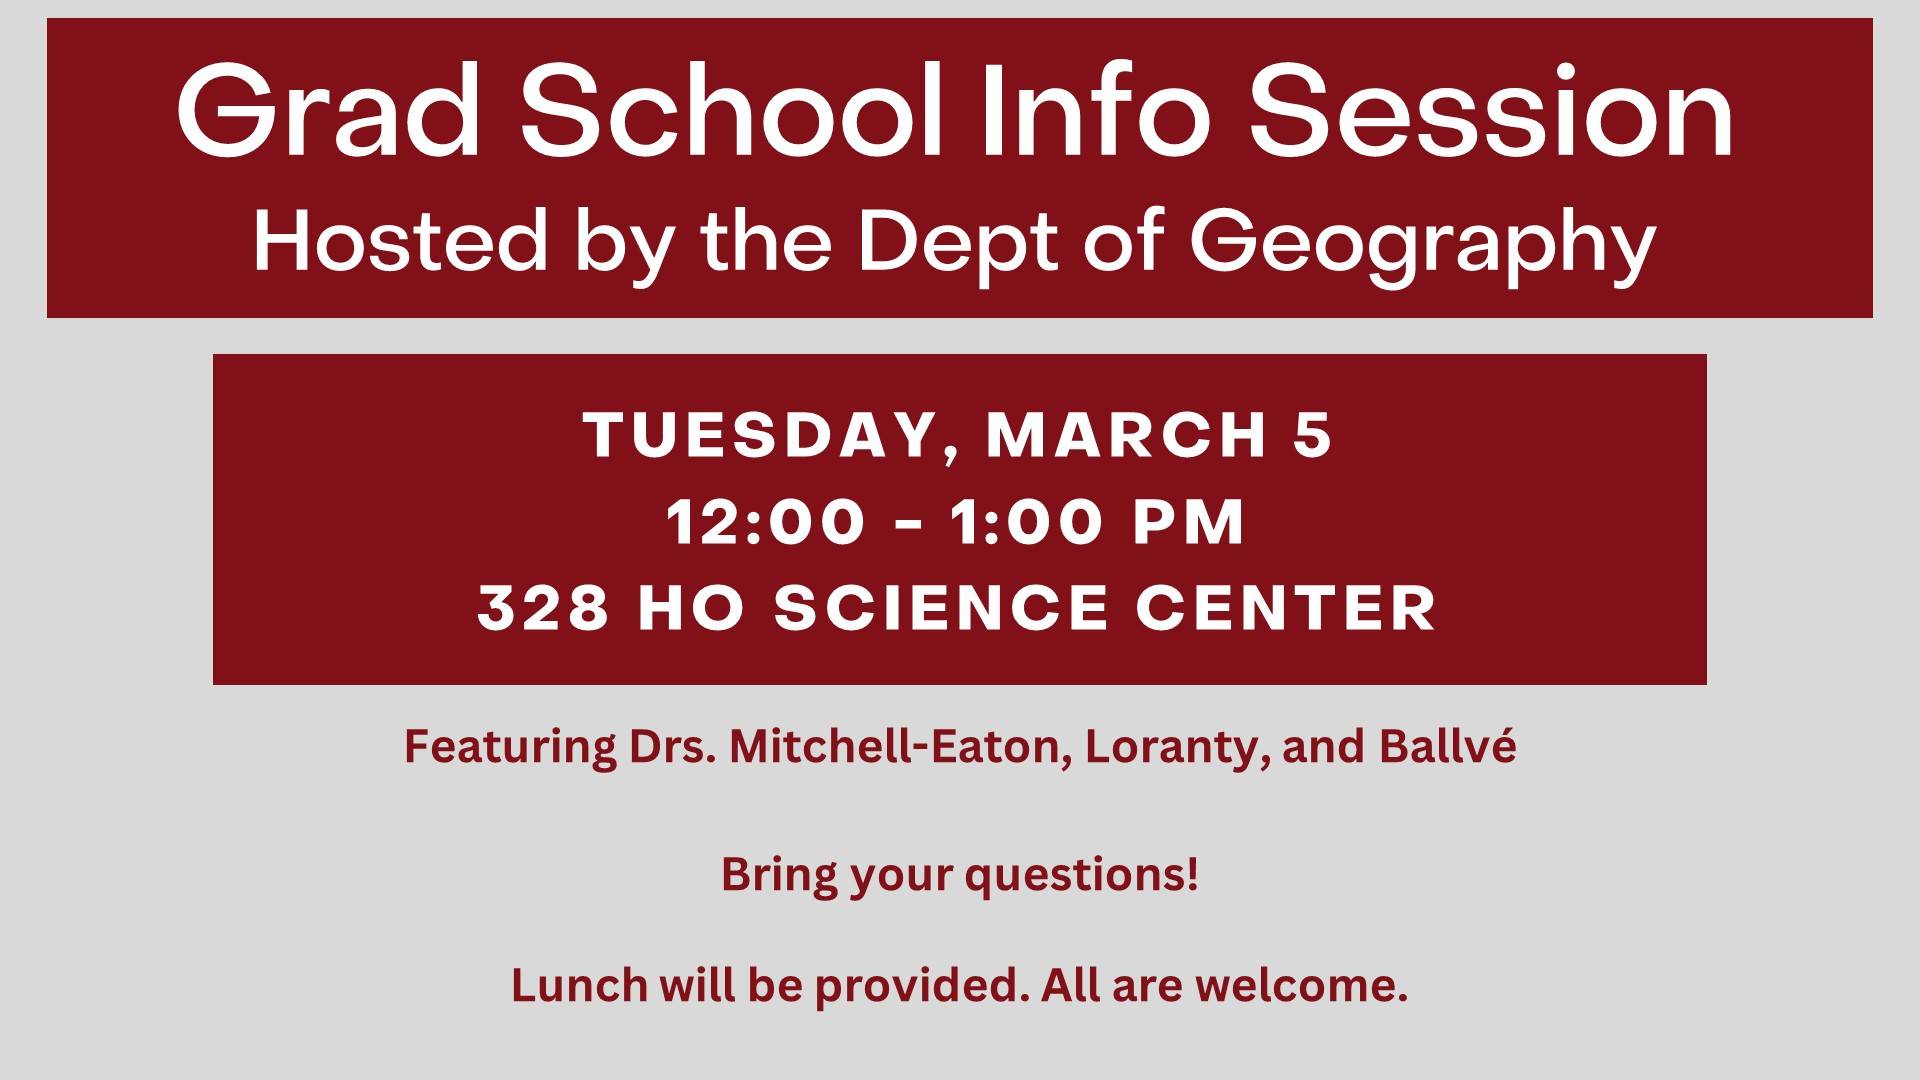 Poster for Grad School Info Session, hosted by the Department of Geography.